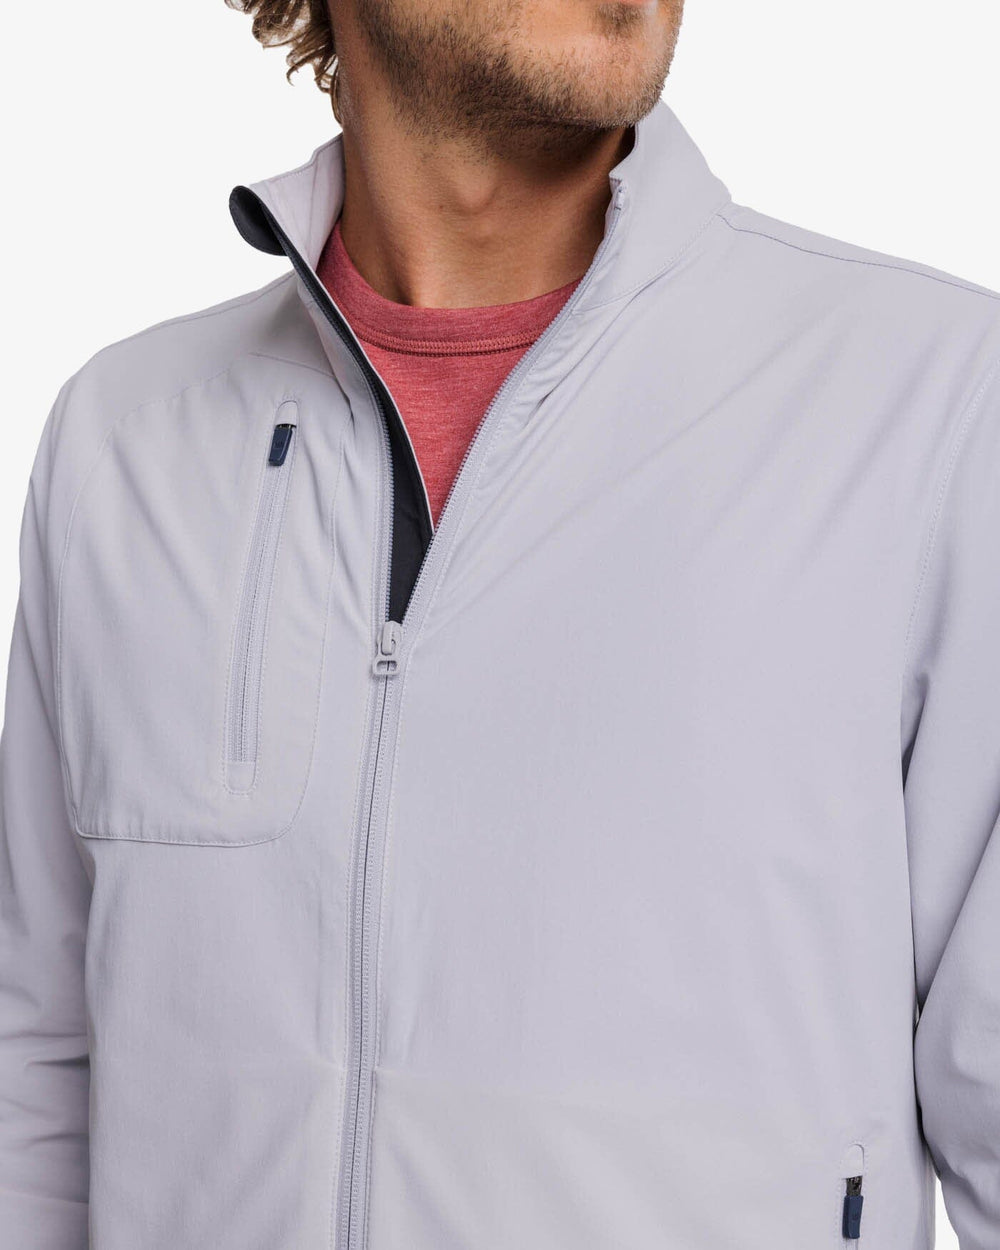 The detail view of the Southern Tide Bowline Performance Jacket by Southern Tide - Platinum Grey